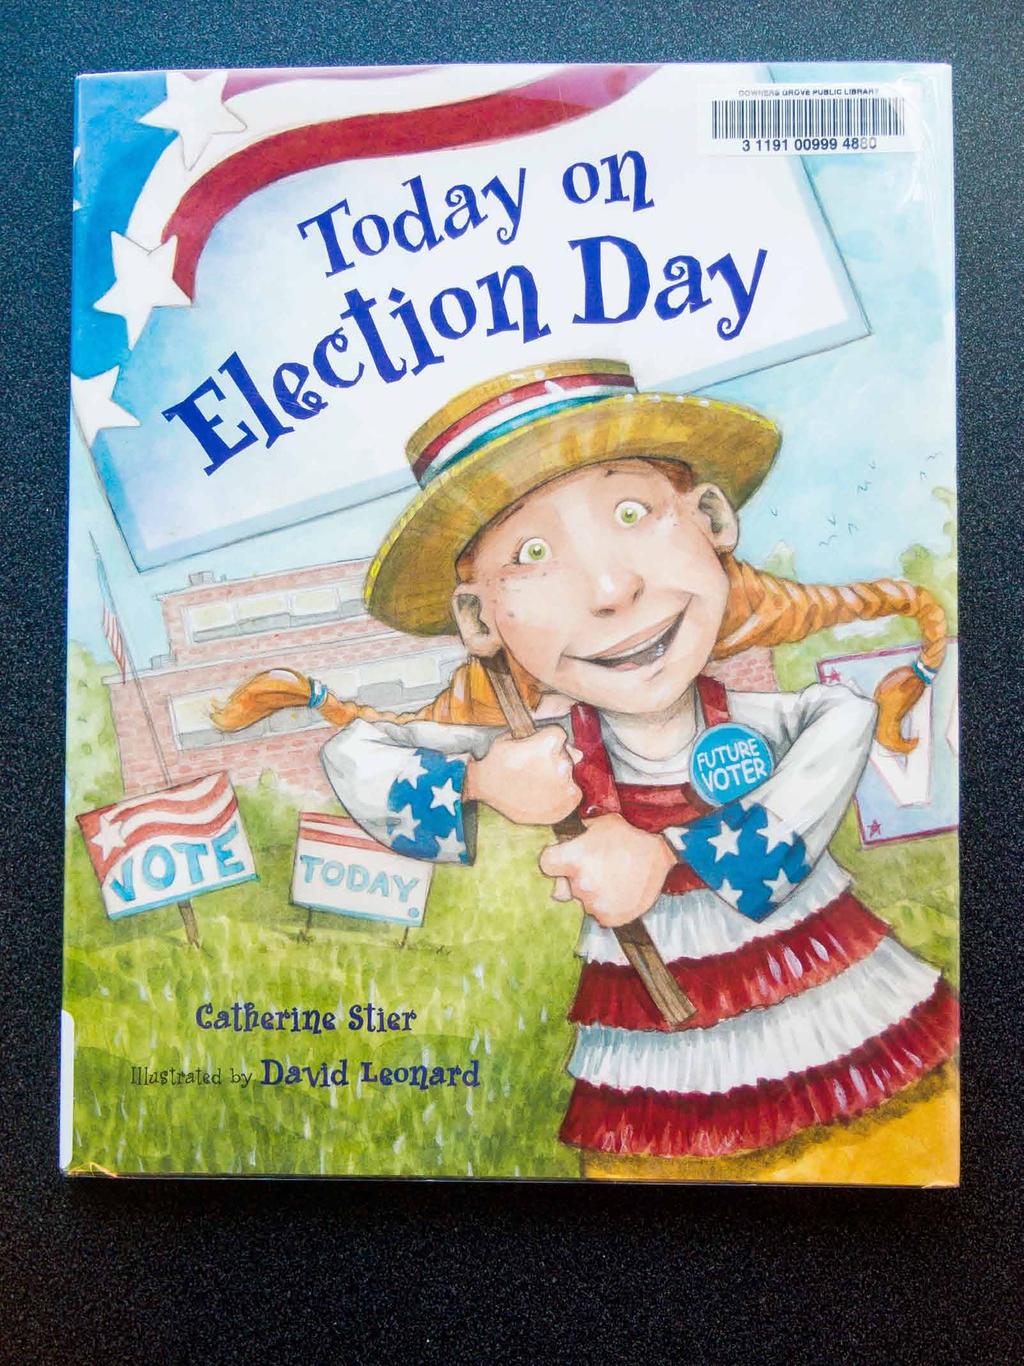 LESSON ONE: CAMPAIGN AND ELECTION 101 Level: Grades 1 3 Purpose: Students will learn about the campaign and election process while listening to Today on Election Day by Catherine Stier.